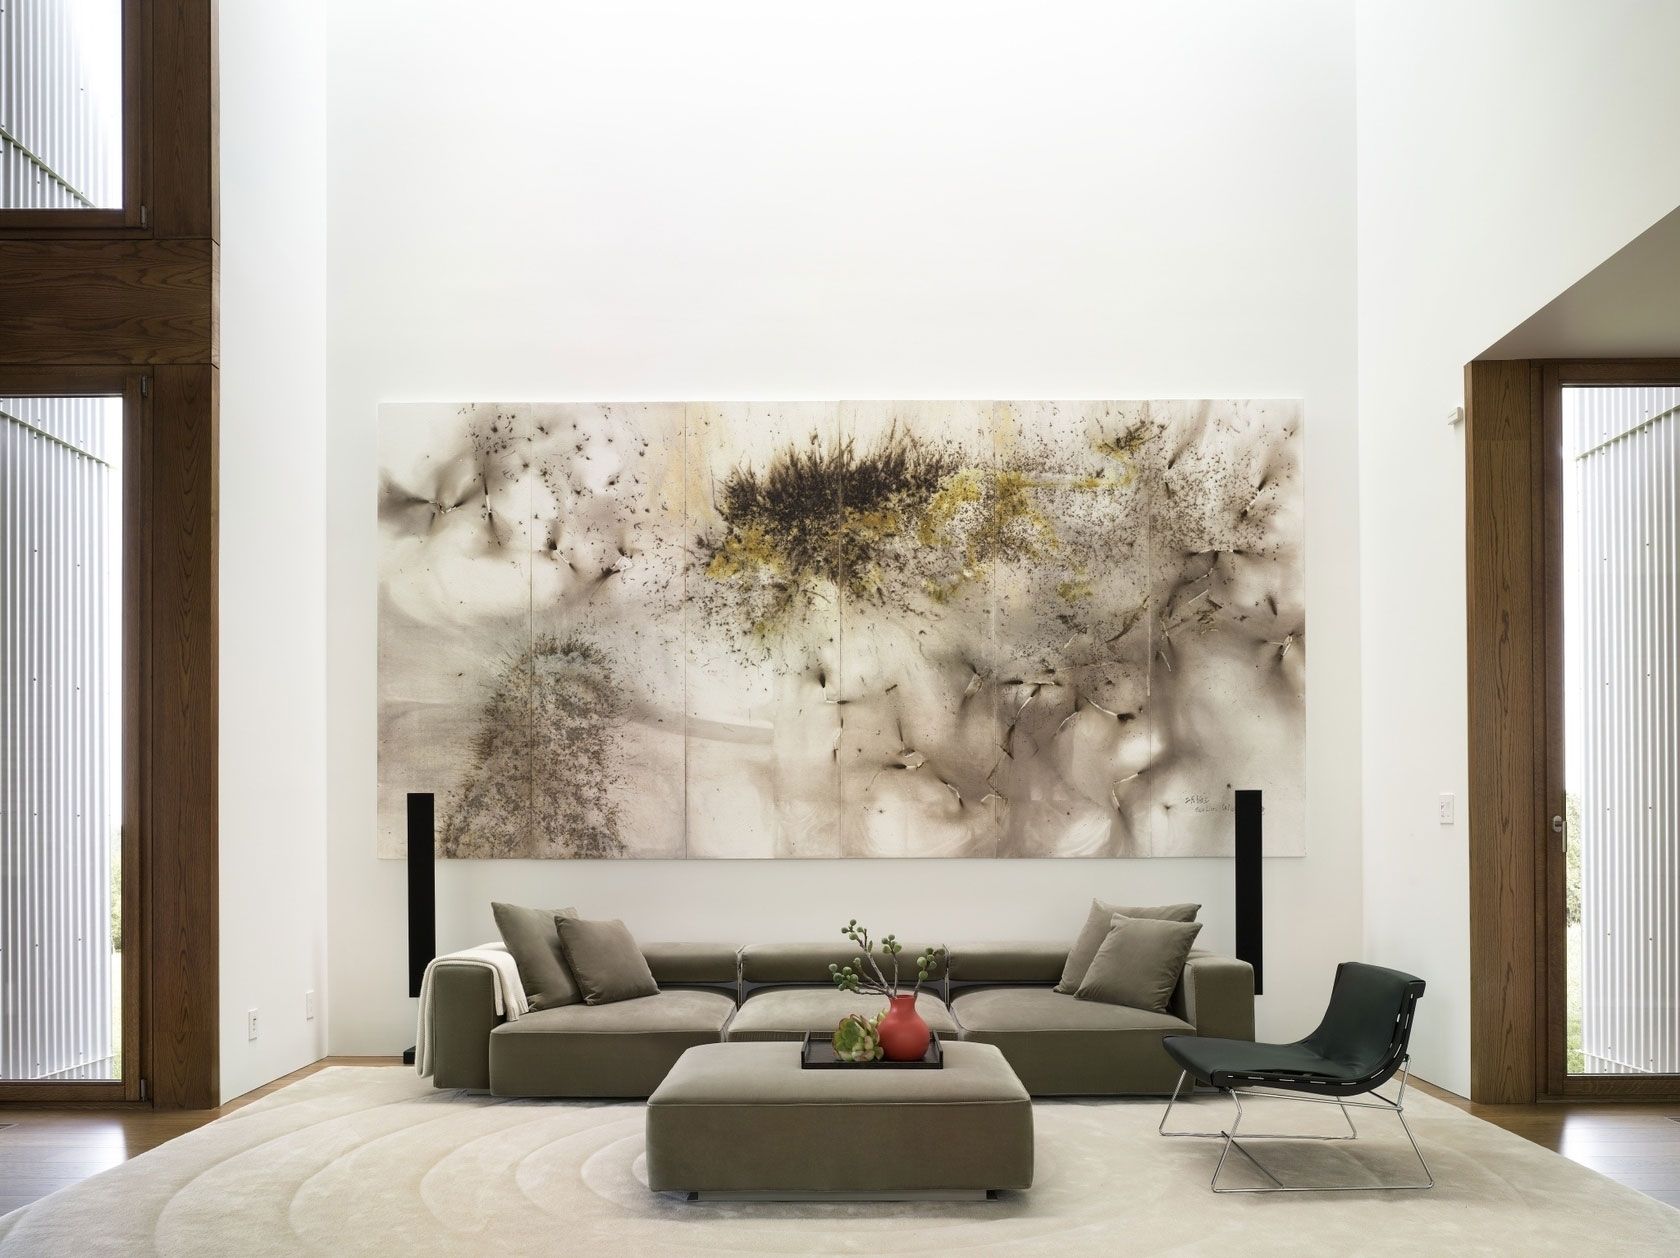 Oversized Wall Art Ideas Oversized Wall Art Ideas On Luxurious Within Giant Wall Art (View 4 of 20)